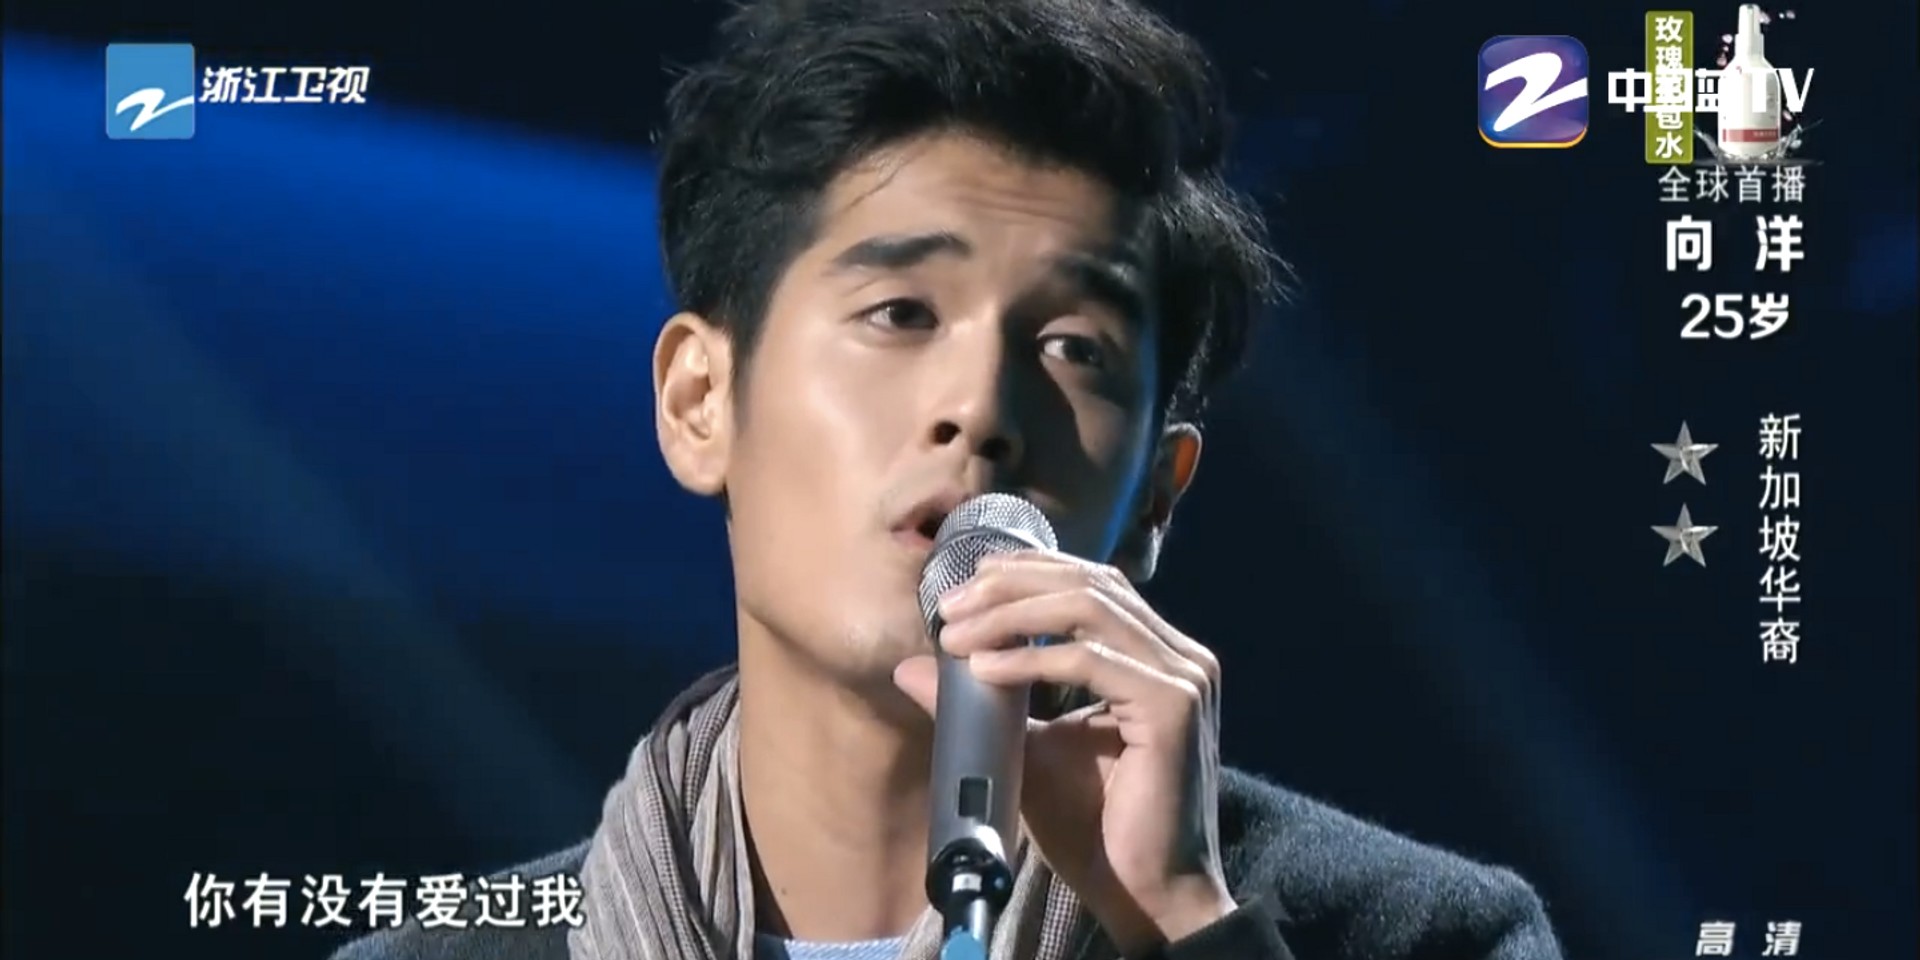 WATCH: Nathan Hartono stuns on Sing! China, wins over Jay Chou and (presumably) the entire country